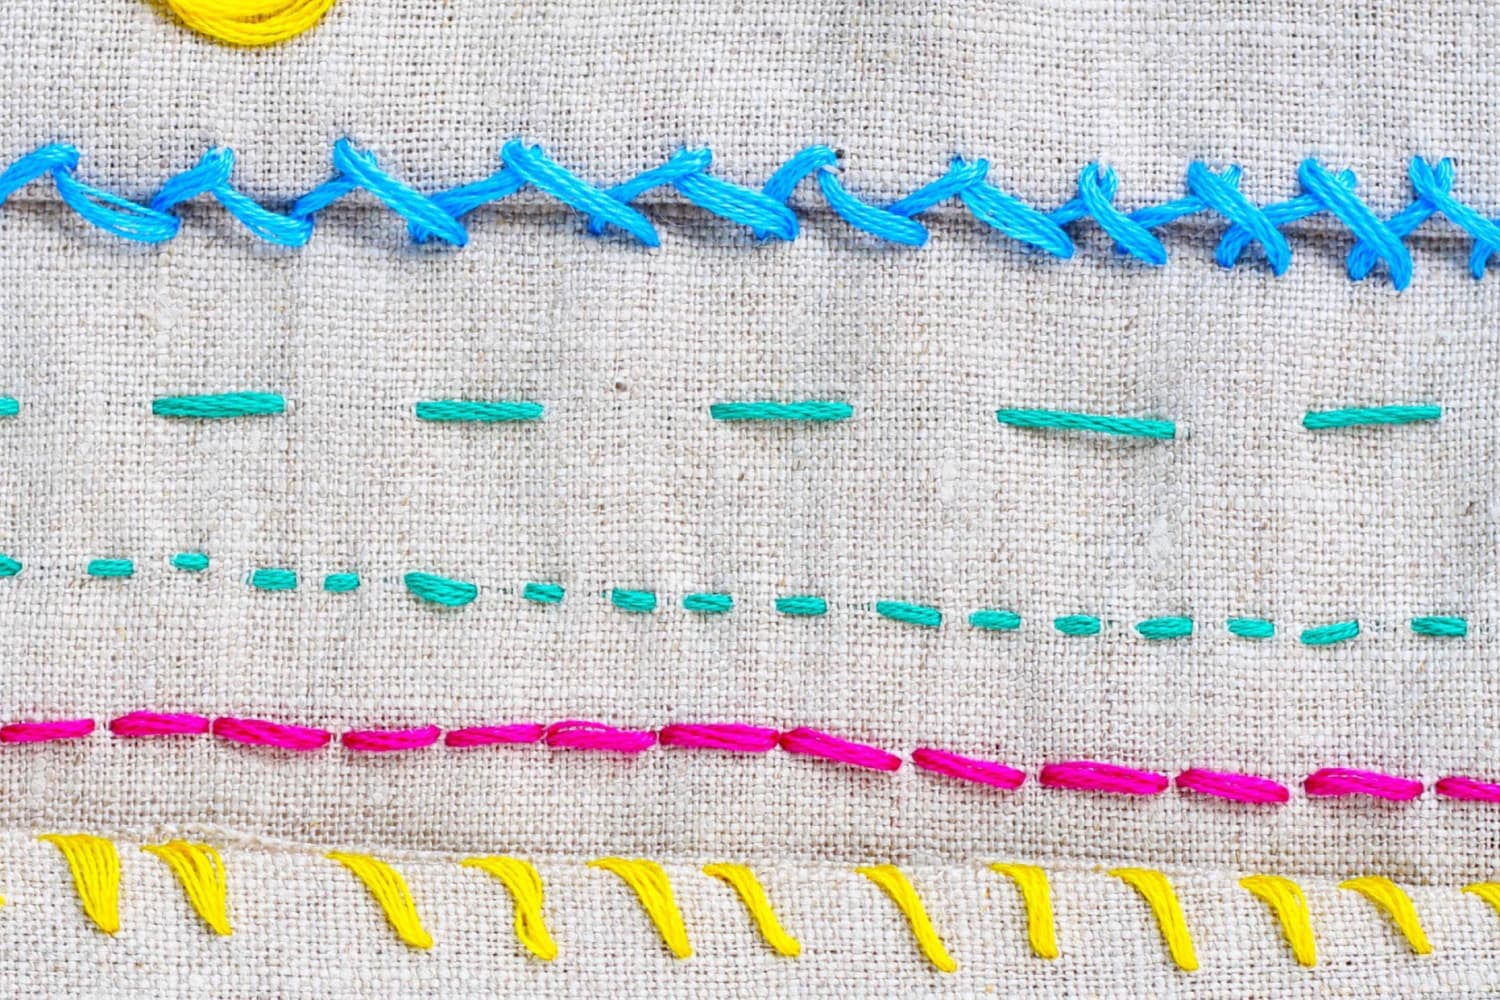 How to Sew Common Stitches by Hand – Beginner Sewing Projects